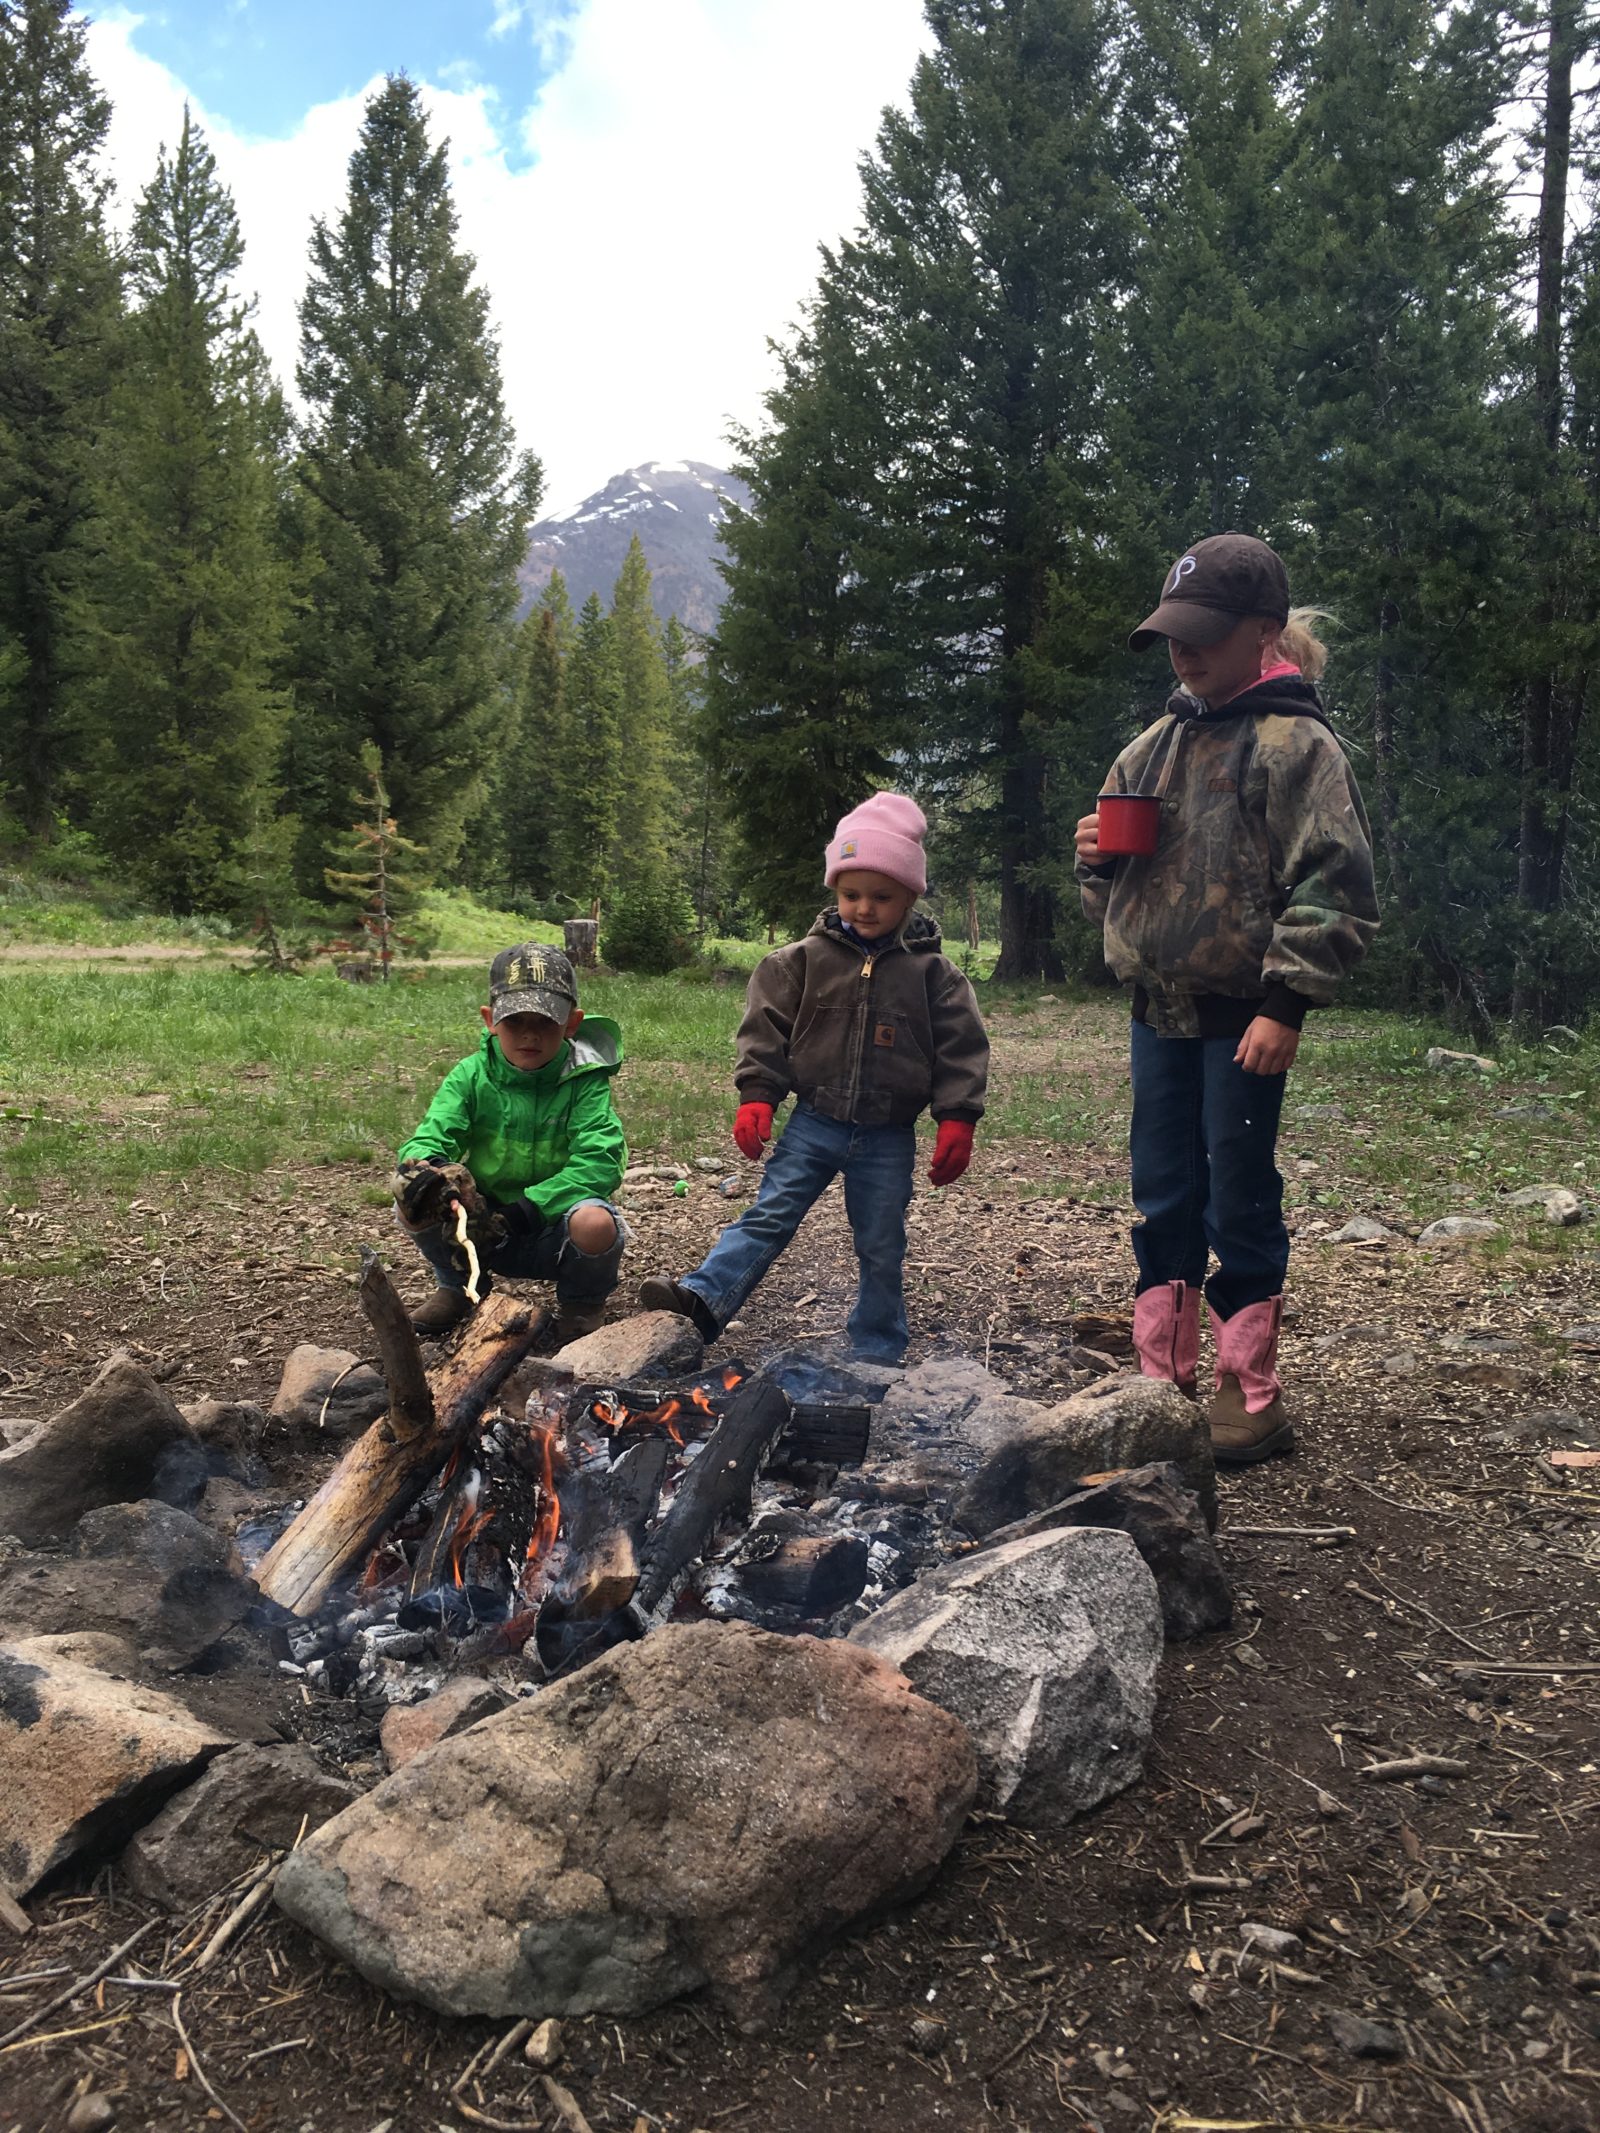 A family standing near a fire pit